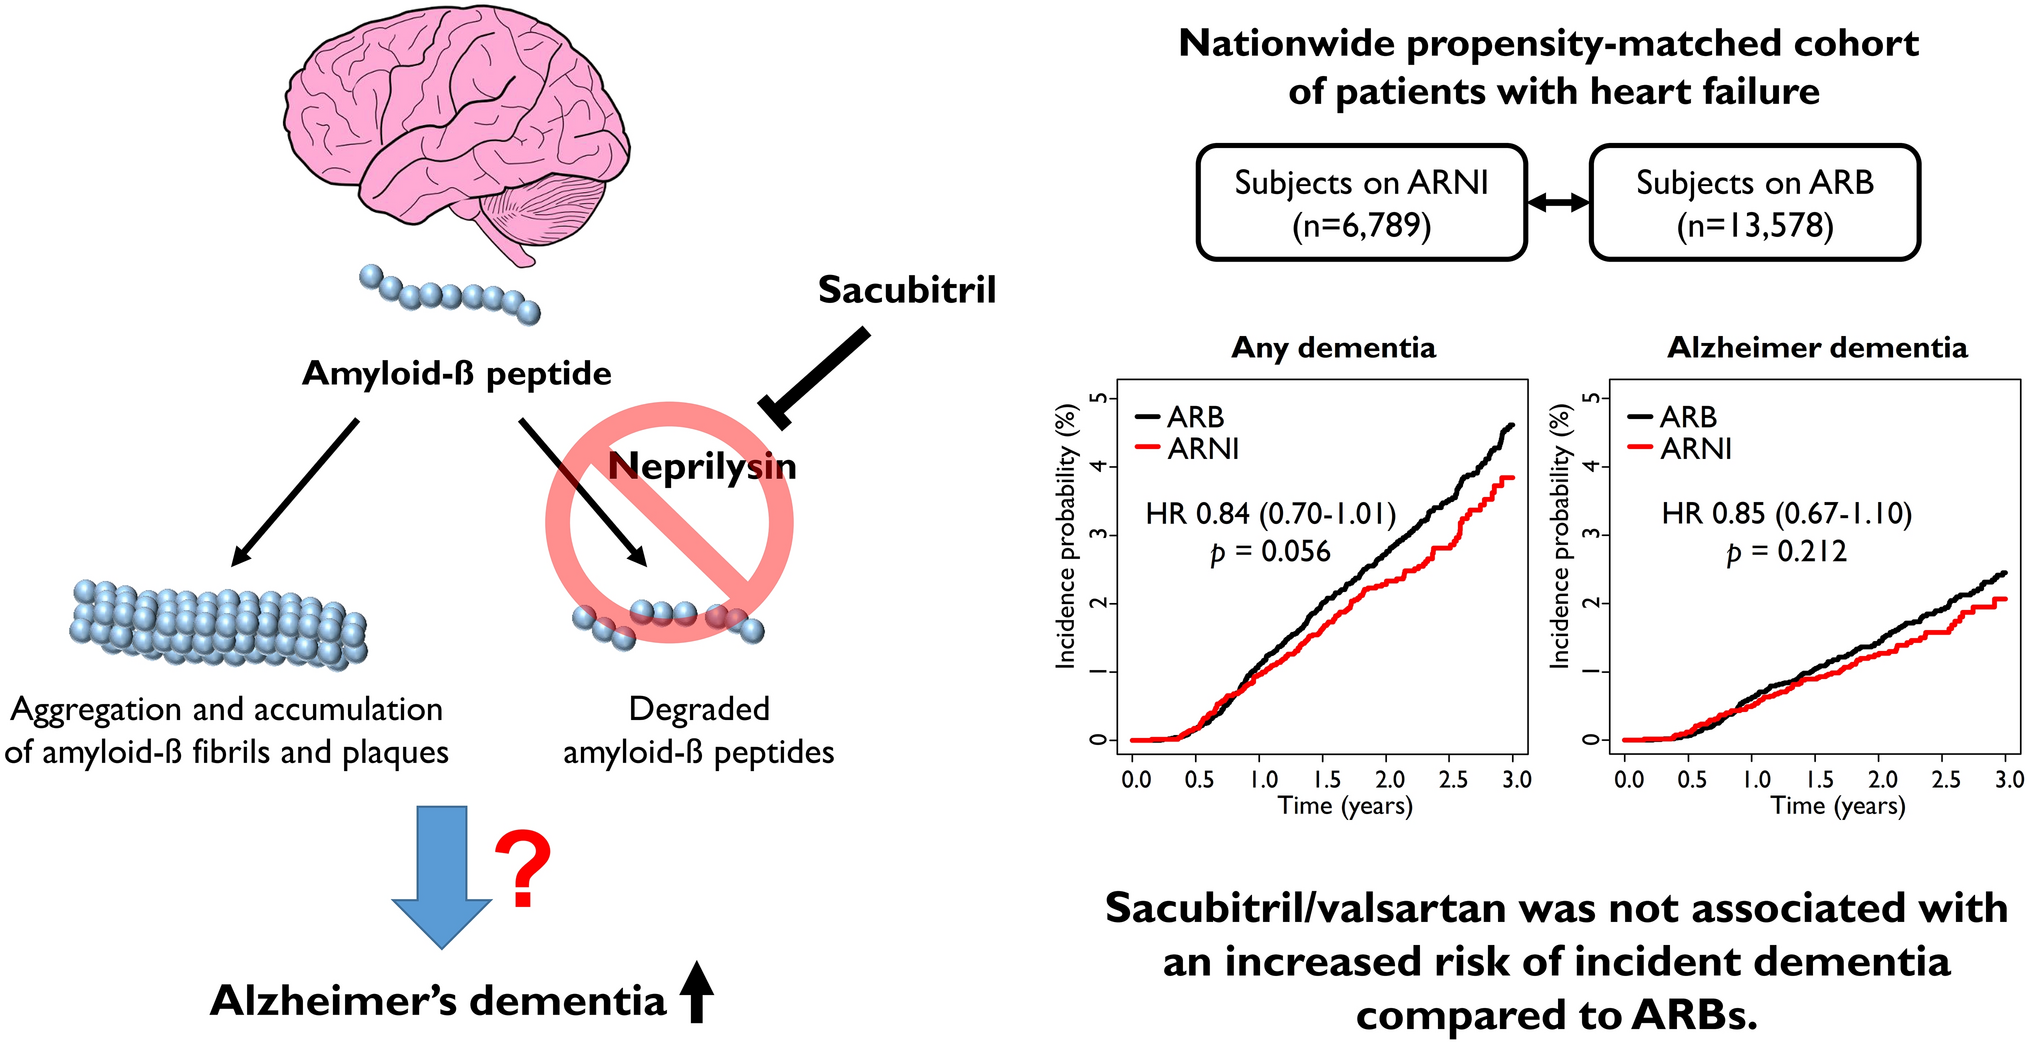 Sacubitril/valsartan and the risk of incident dementia in heart failure: a nationwide propensity-matched cohort study